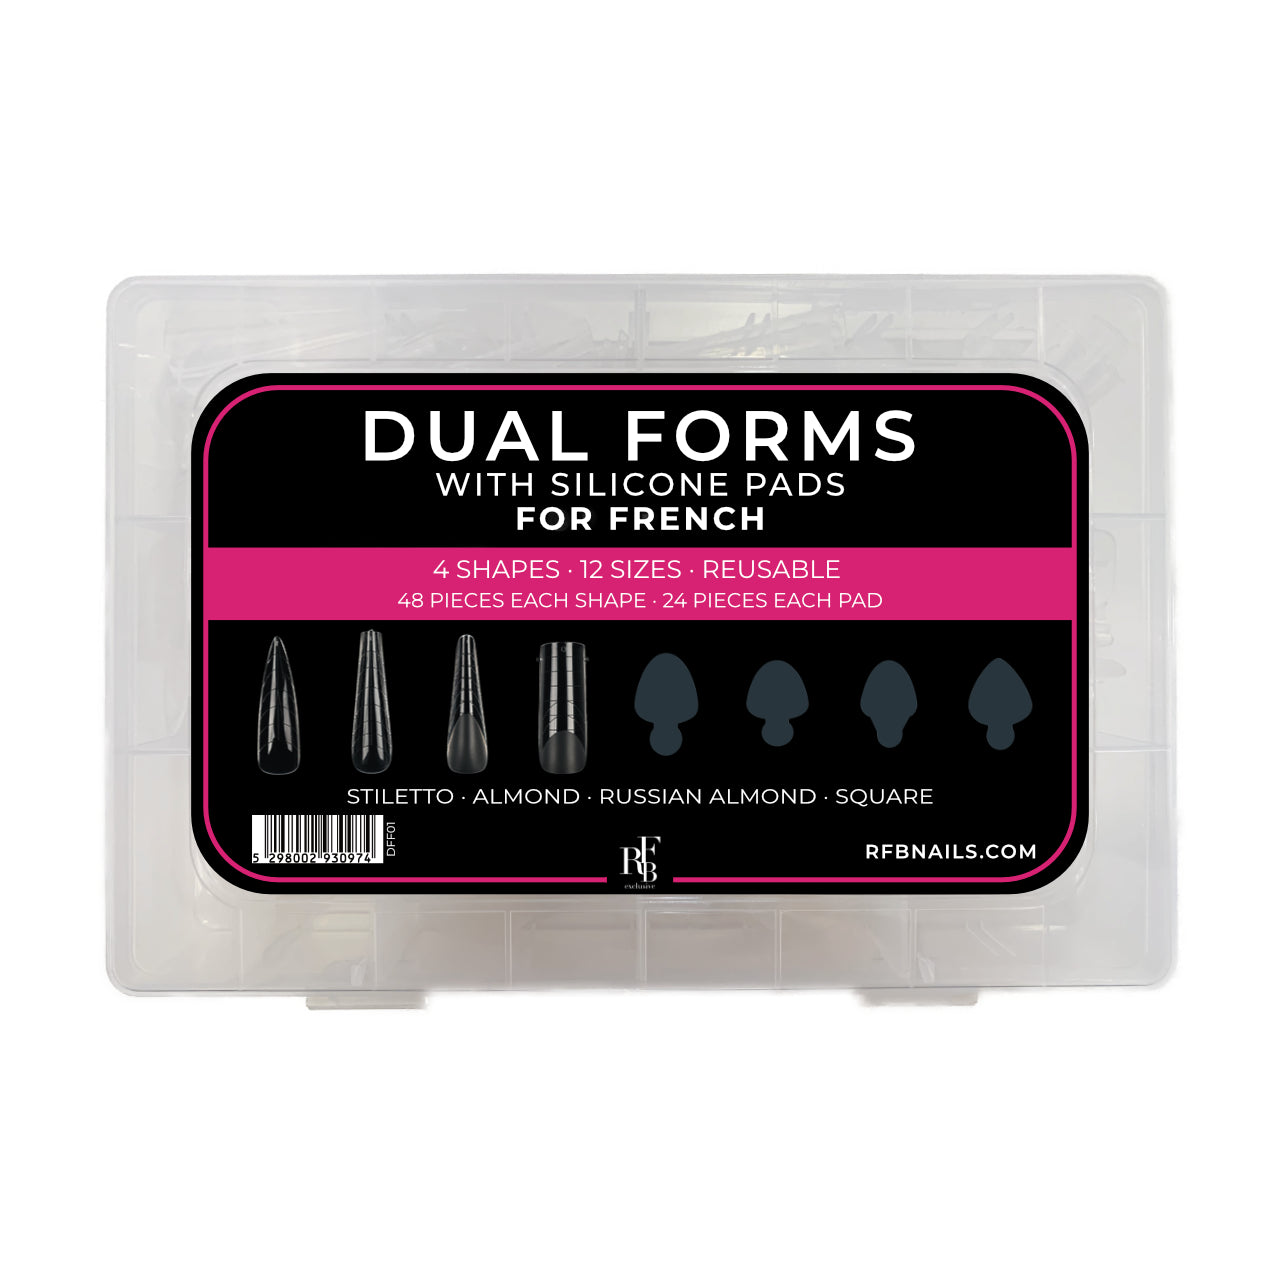 Dual Forms with Silicone Pads for French